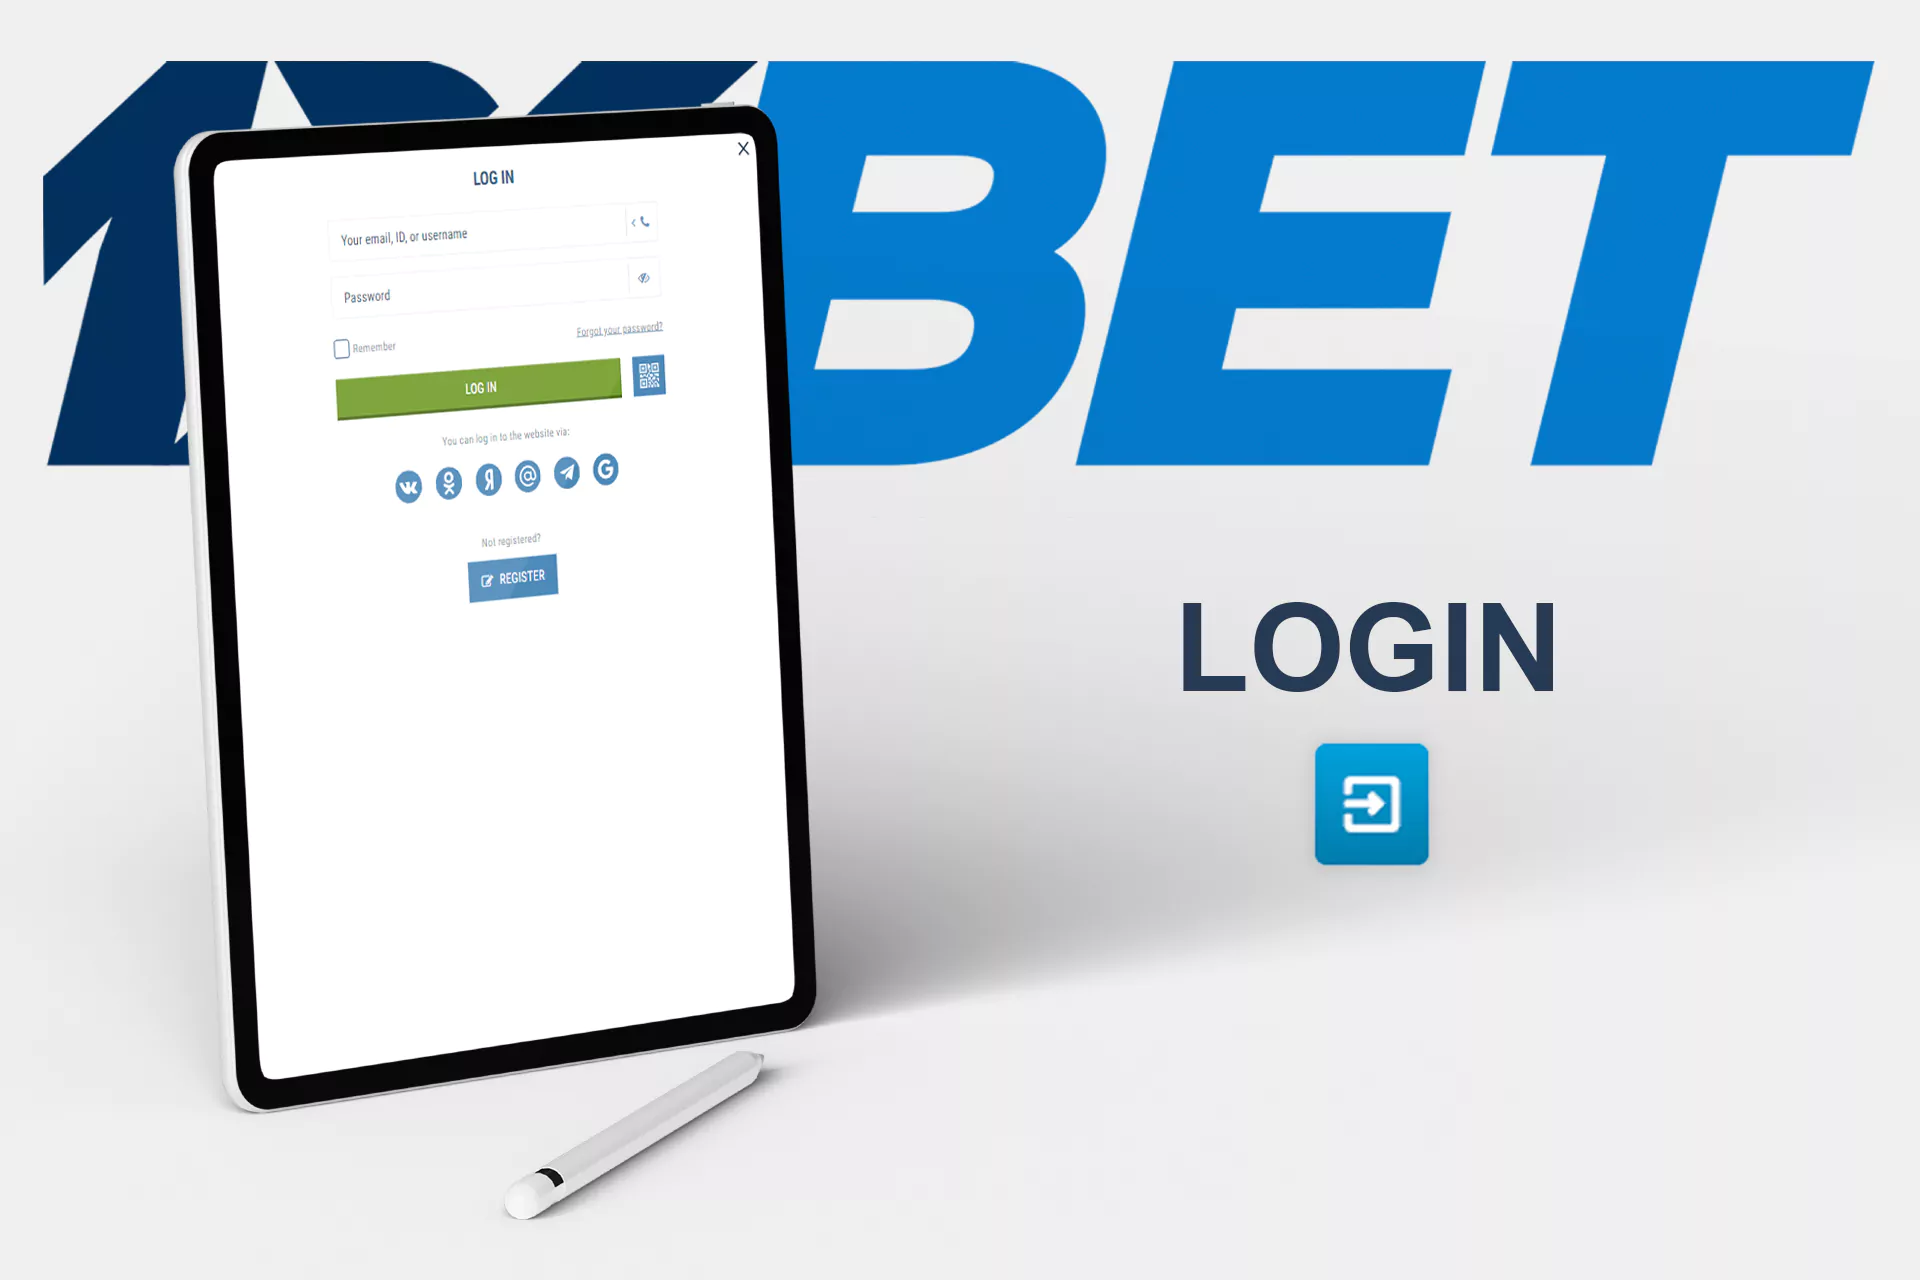 You can log in to the 1xBet website or the app by using your ID and a password.